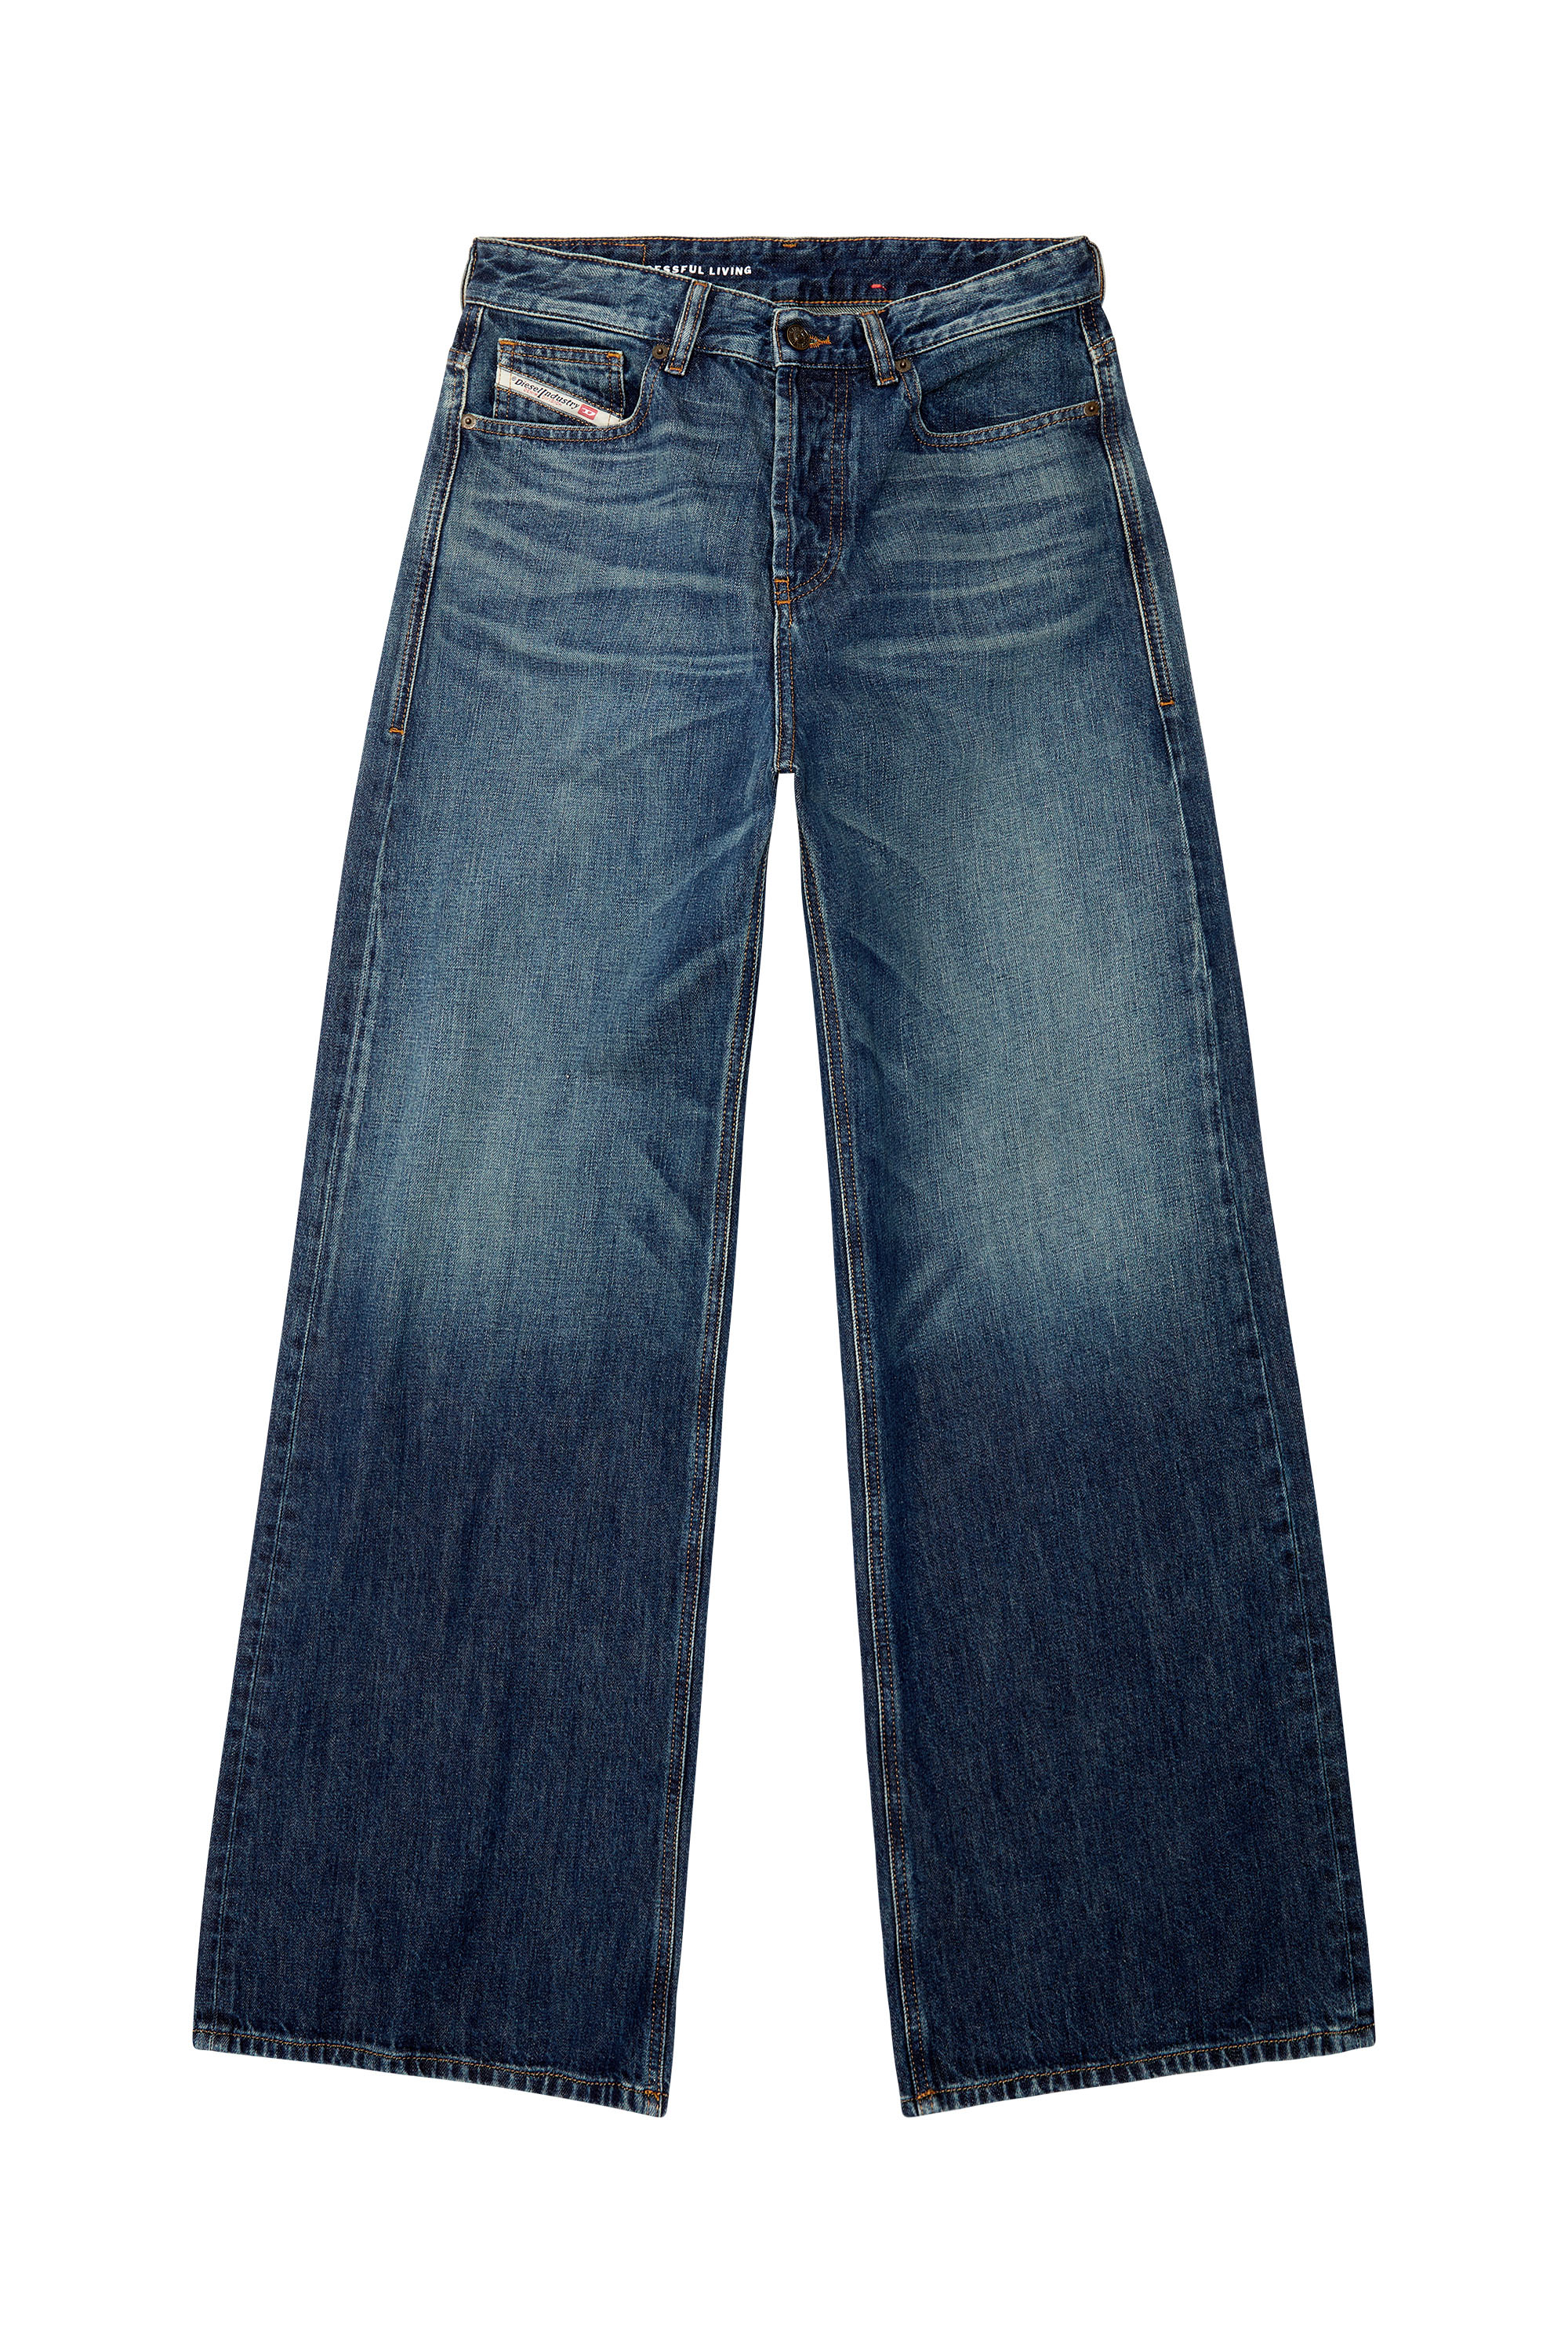 Diesel Woman: Jeans, Clothing, Shoes, Accessories